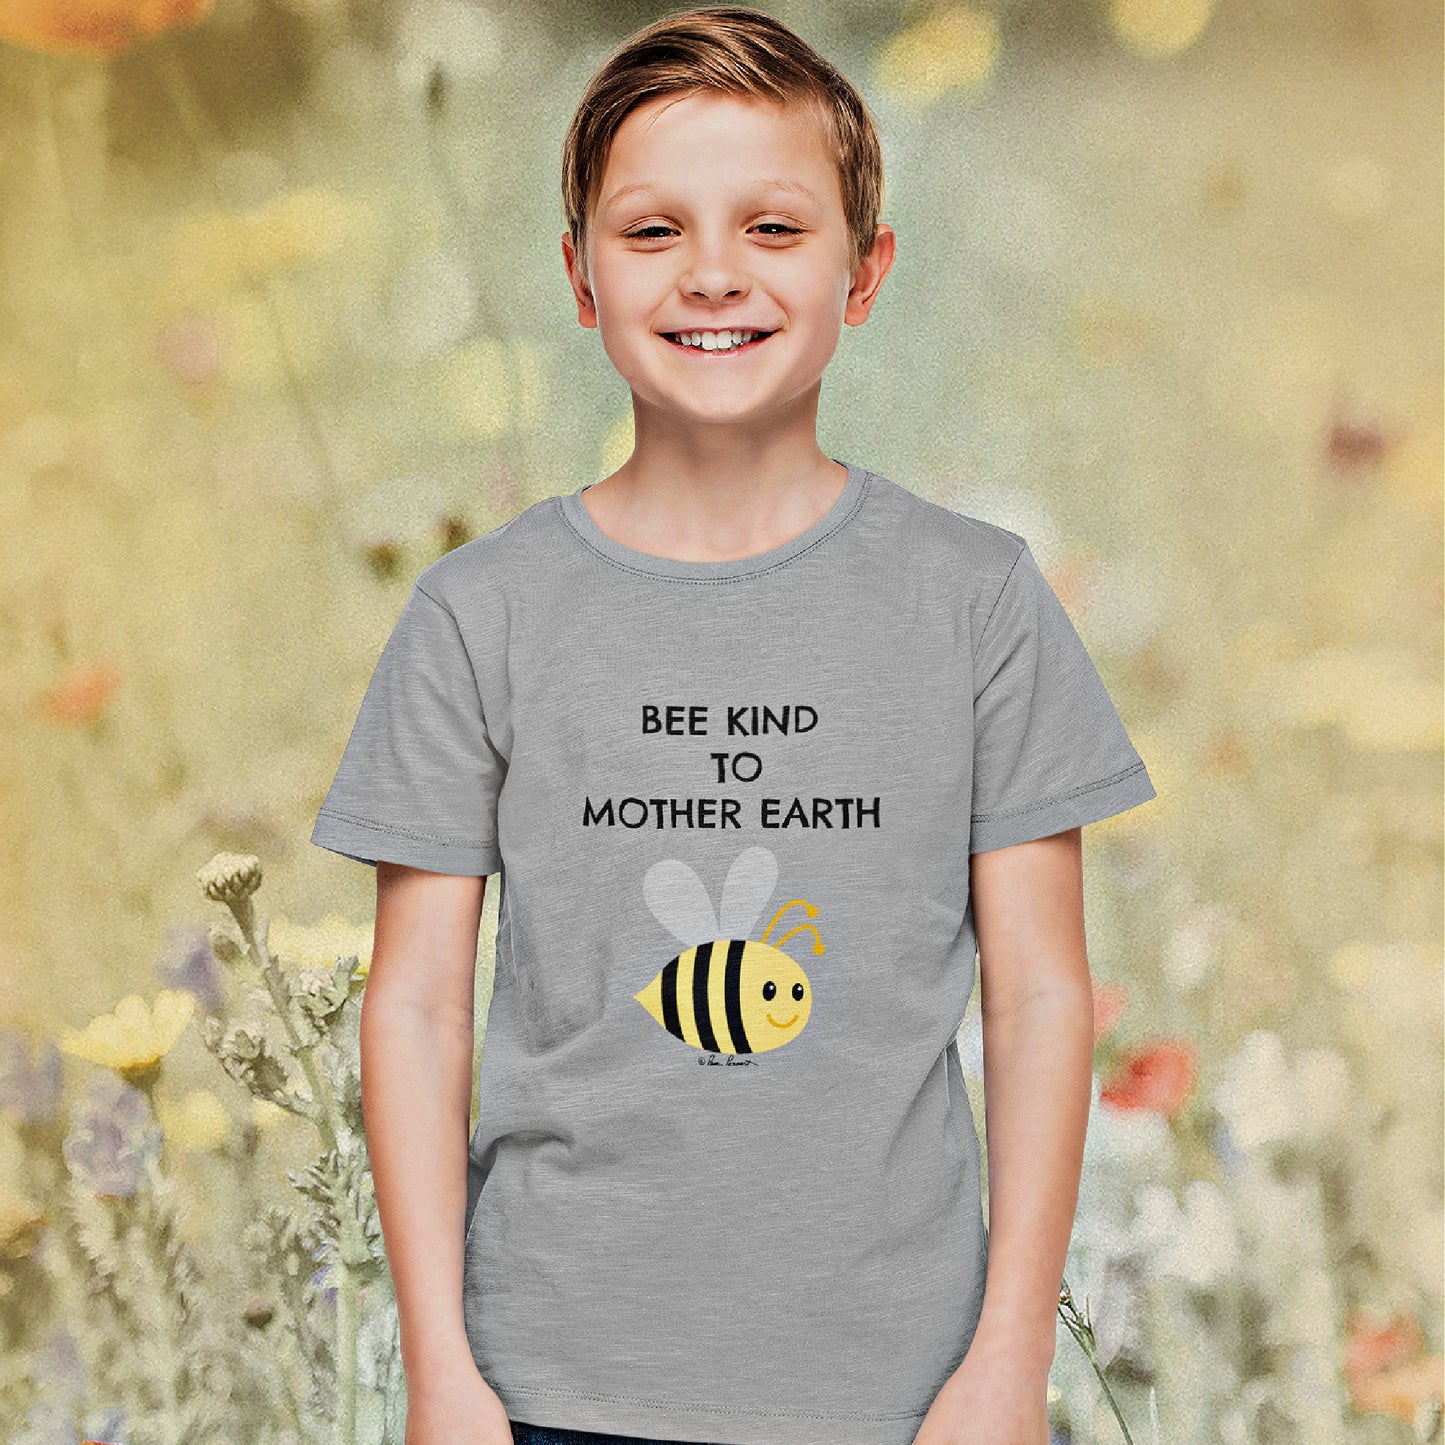 Mock up of a smiling boy wearing our t-shirt